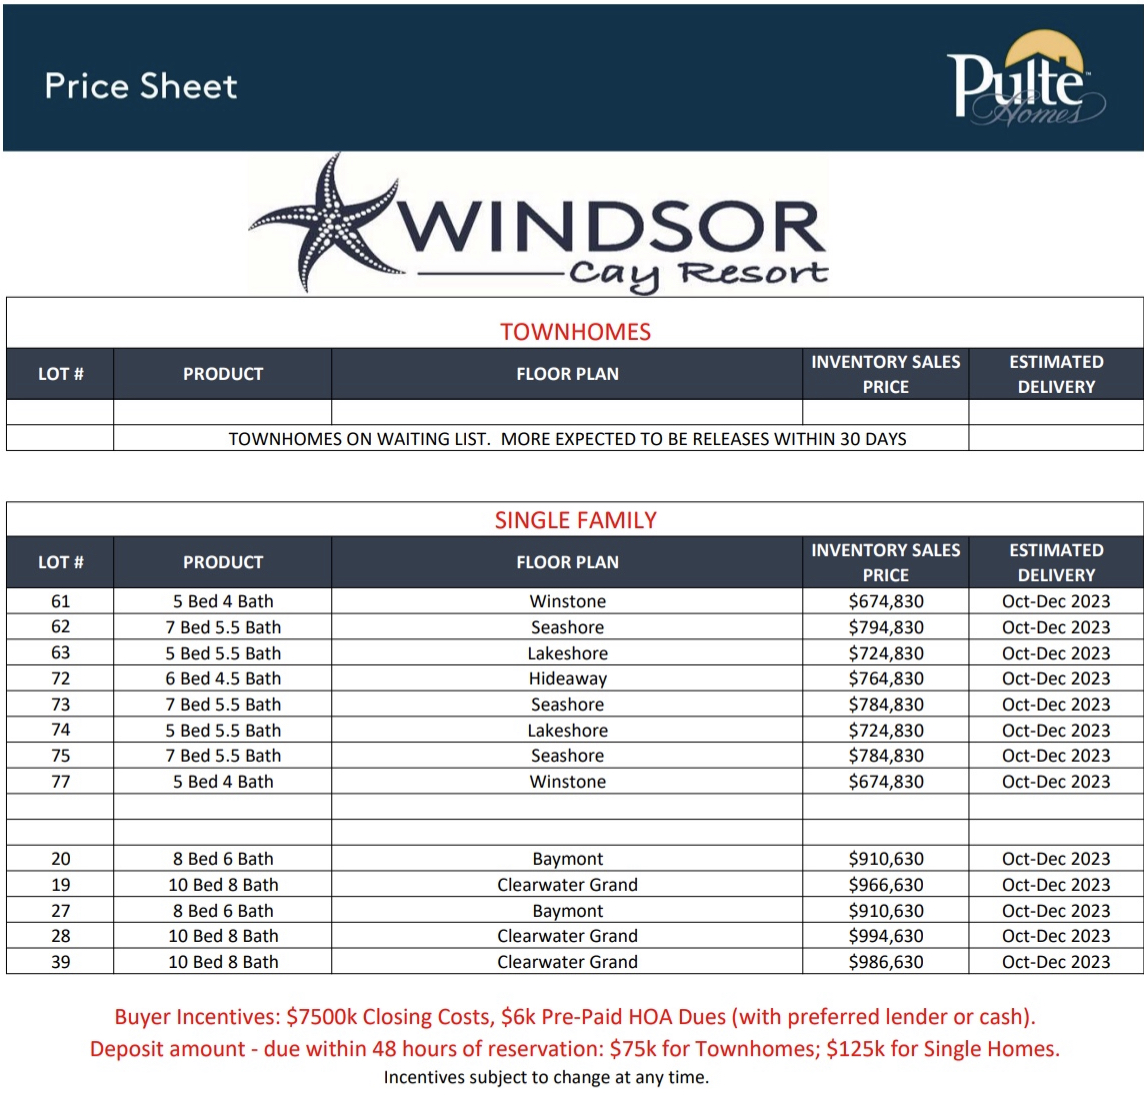 WINDSOR CAY ORLANDO PRICING- WEEK OF March 10, 2023 | Looking for a luxurious vacation destination near the heart of Orlando? Consider Windsor Cay - Disney World Vacation Resort by Pulte Homes! Our resort homes are the perfect choice for investors seeking an upscale vacation experience in Orlando, Florida. With close proximity to popular attractions like Walt Disney World, Universal Studios, SeaWorld, and Legoland, Windsor Cay Vacation Resort offers an unparalleled vacation experience. Book your stay today and experience the magic of Orlando!